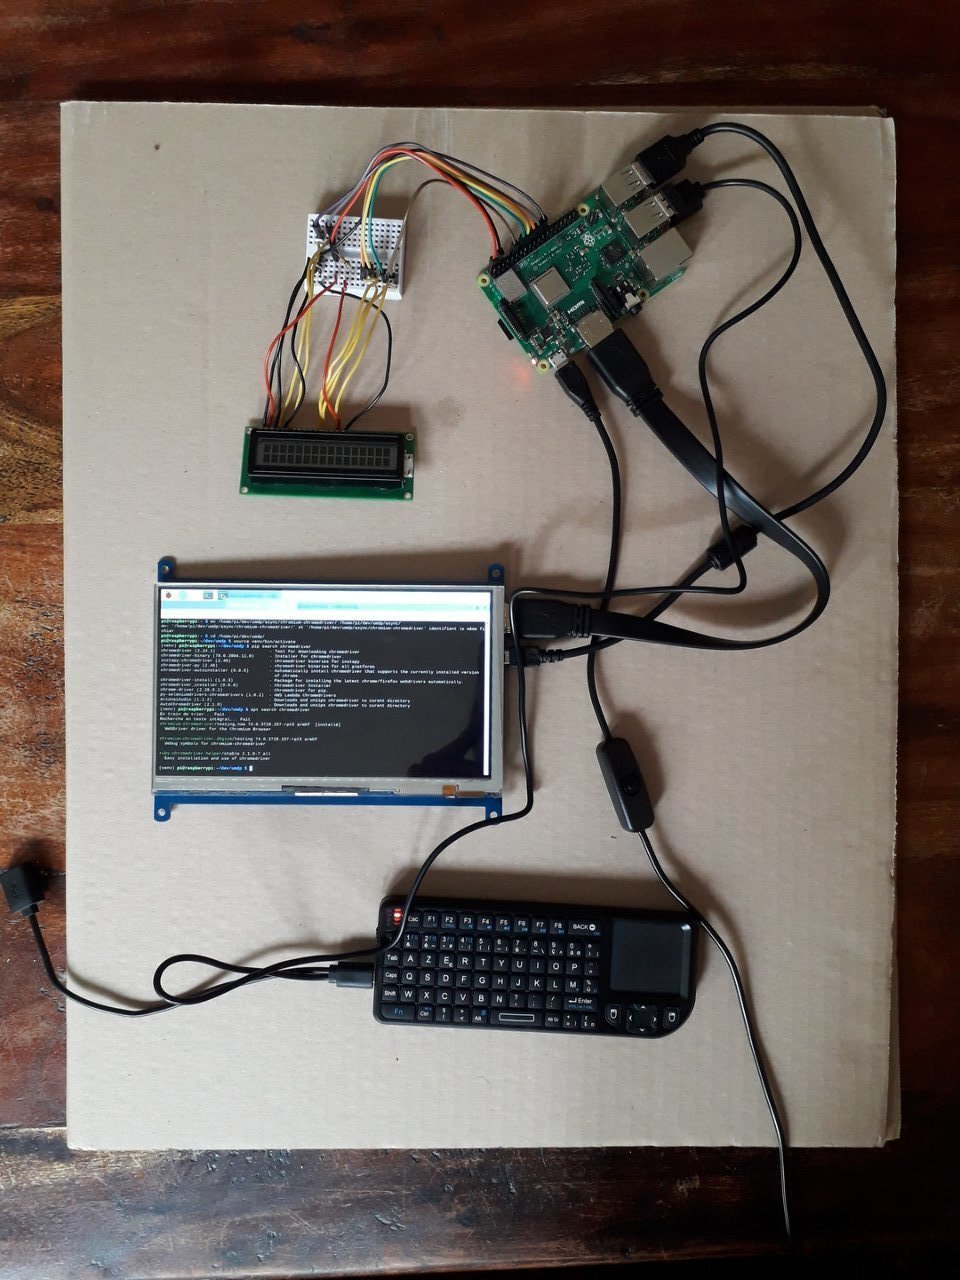 Assembly overview (Raspi, LCD and GPS display, keyboard)